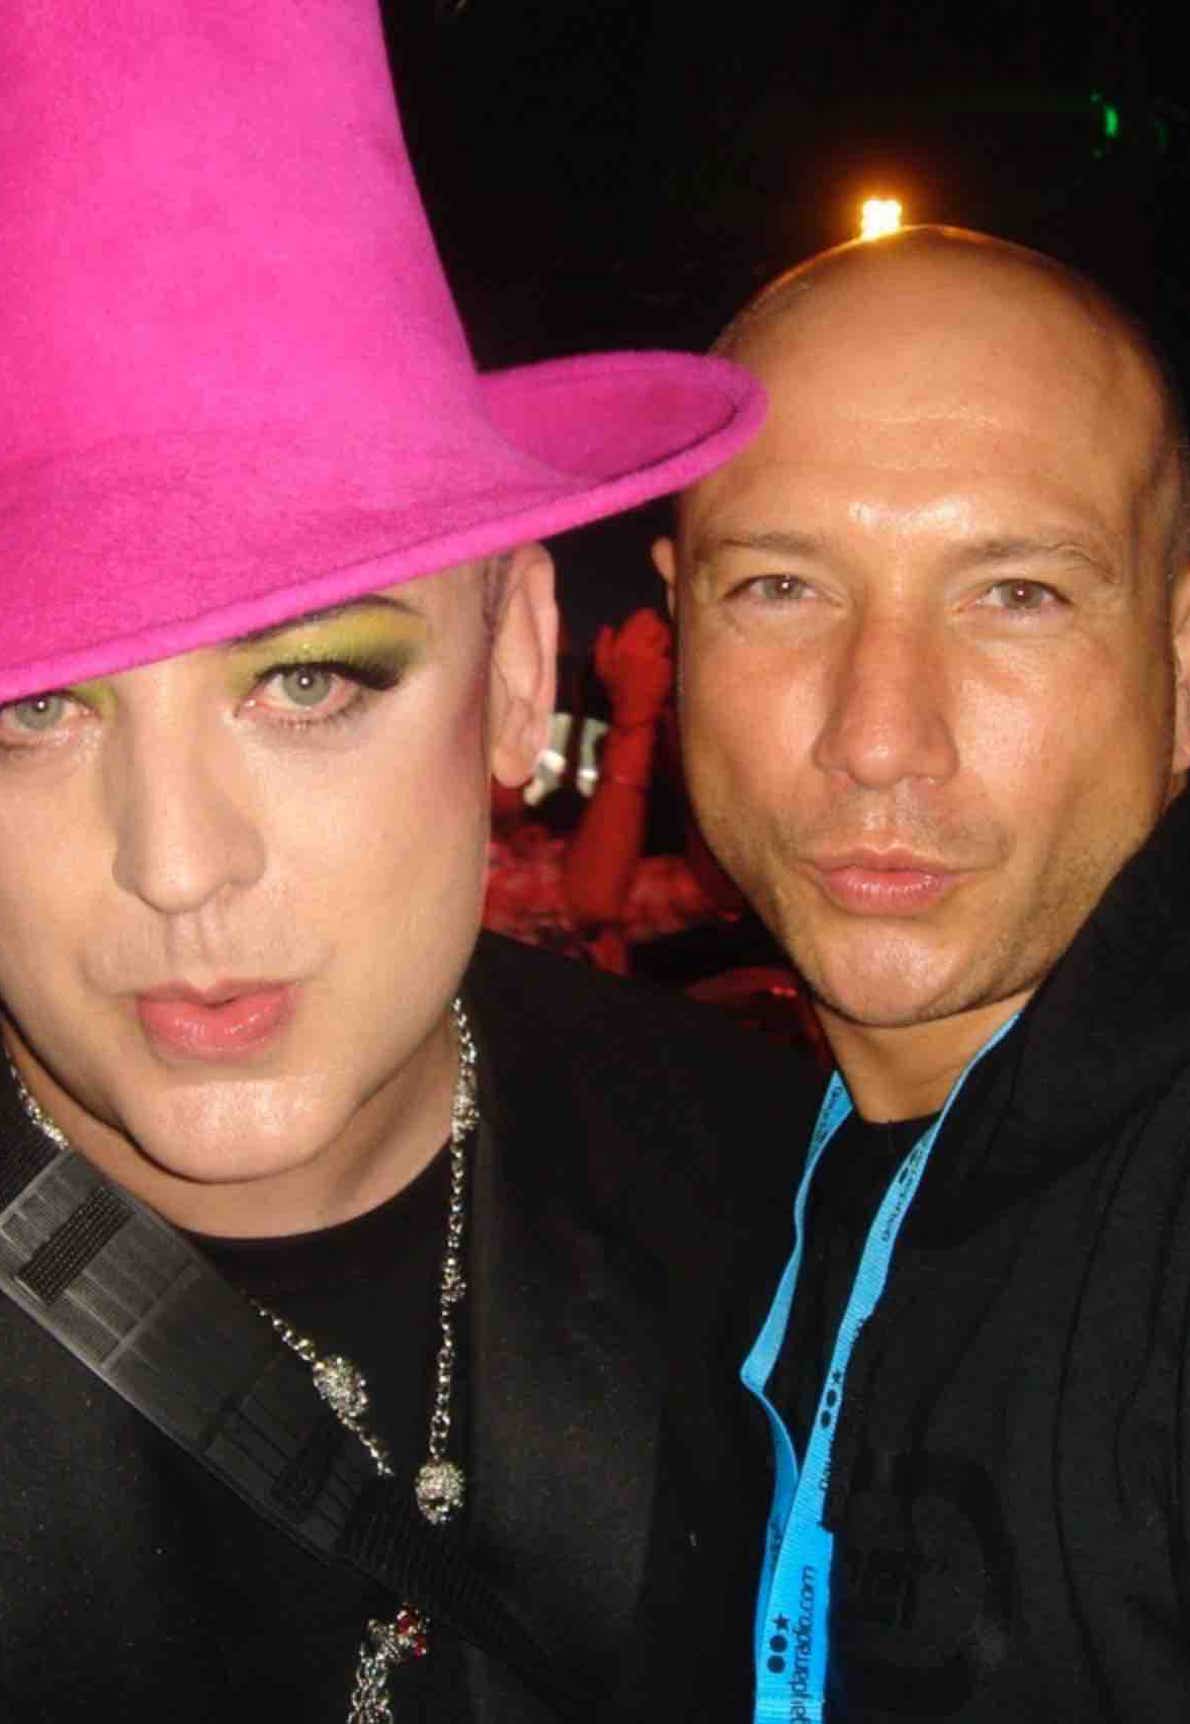 Photograph of David-H and Boy George